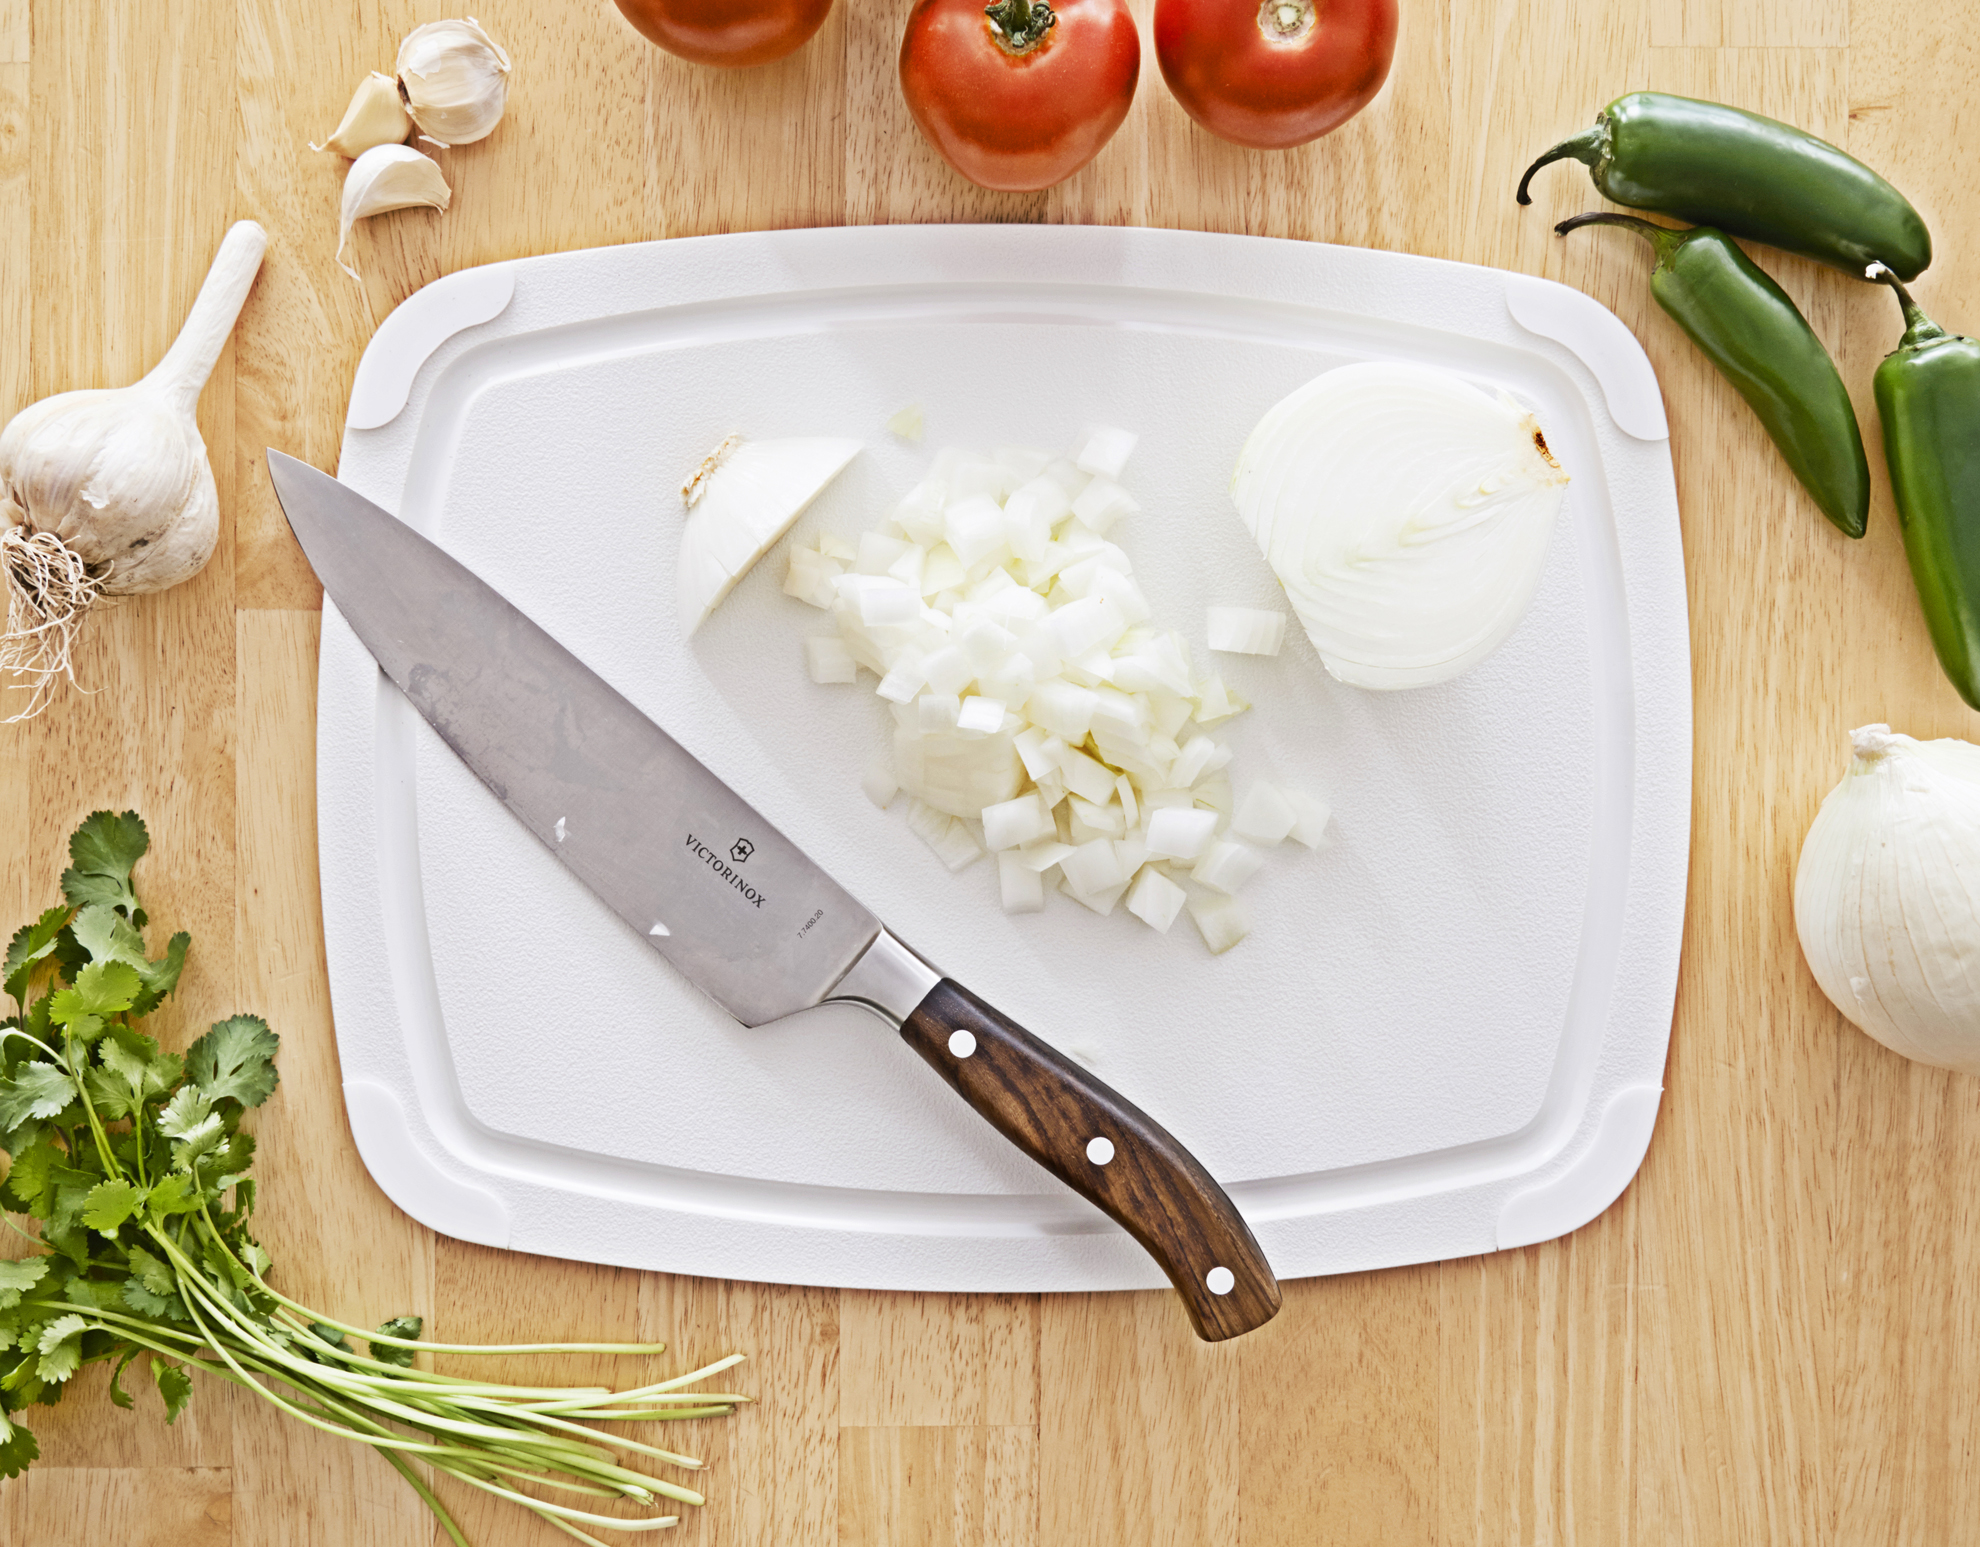 ecooks-image1-cutting board poly series-white-402151107-env